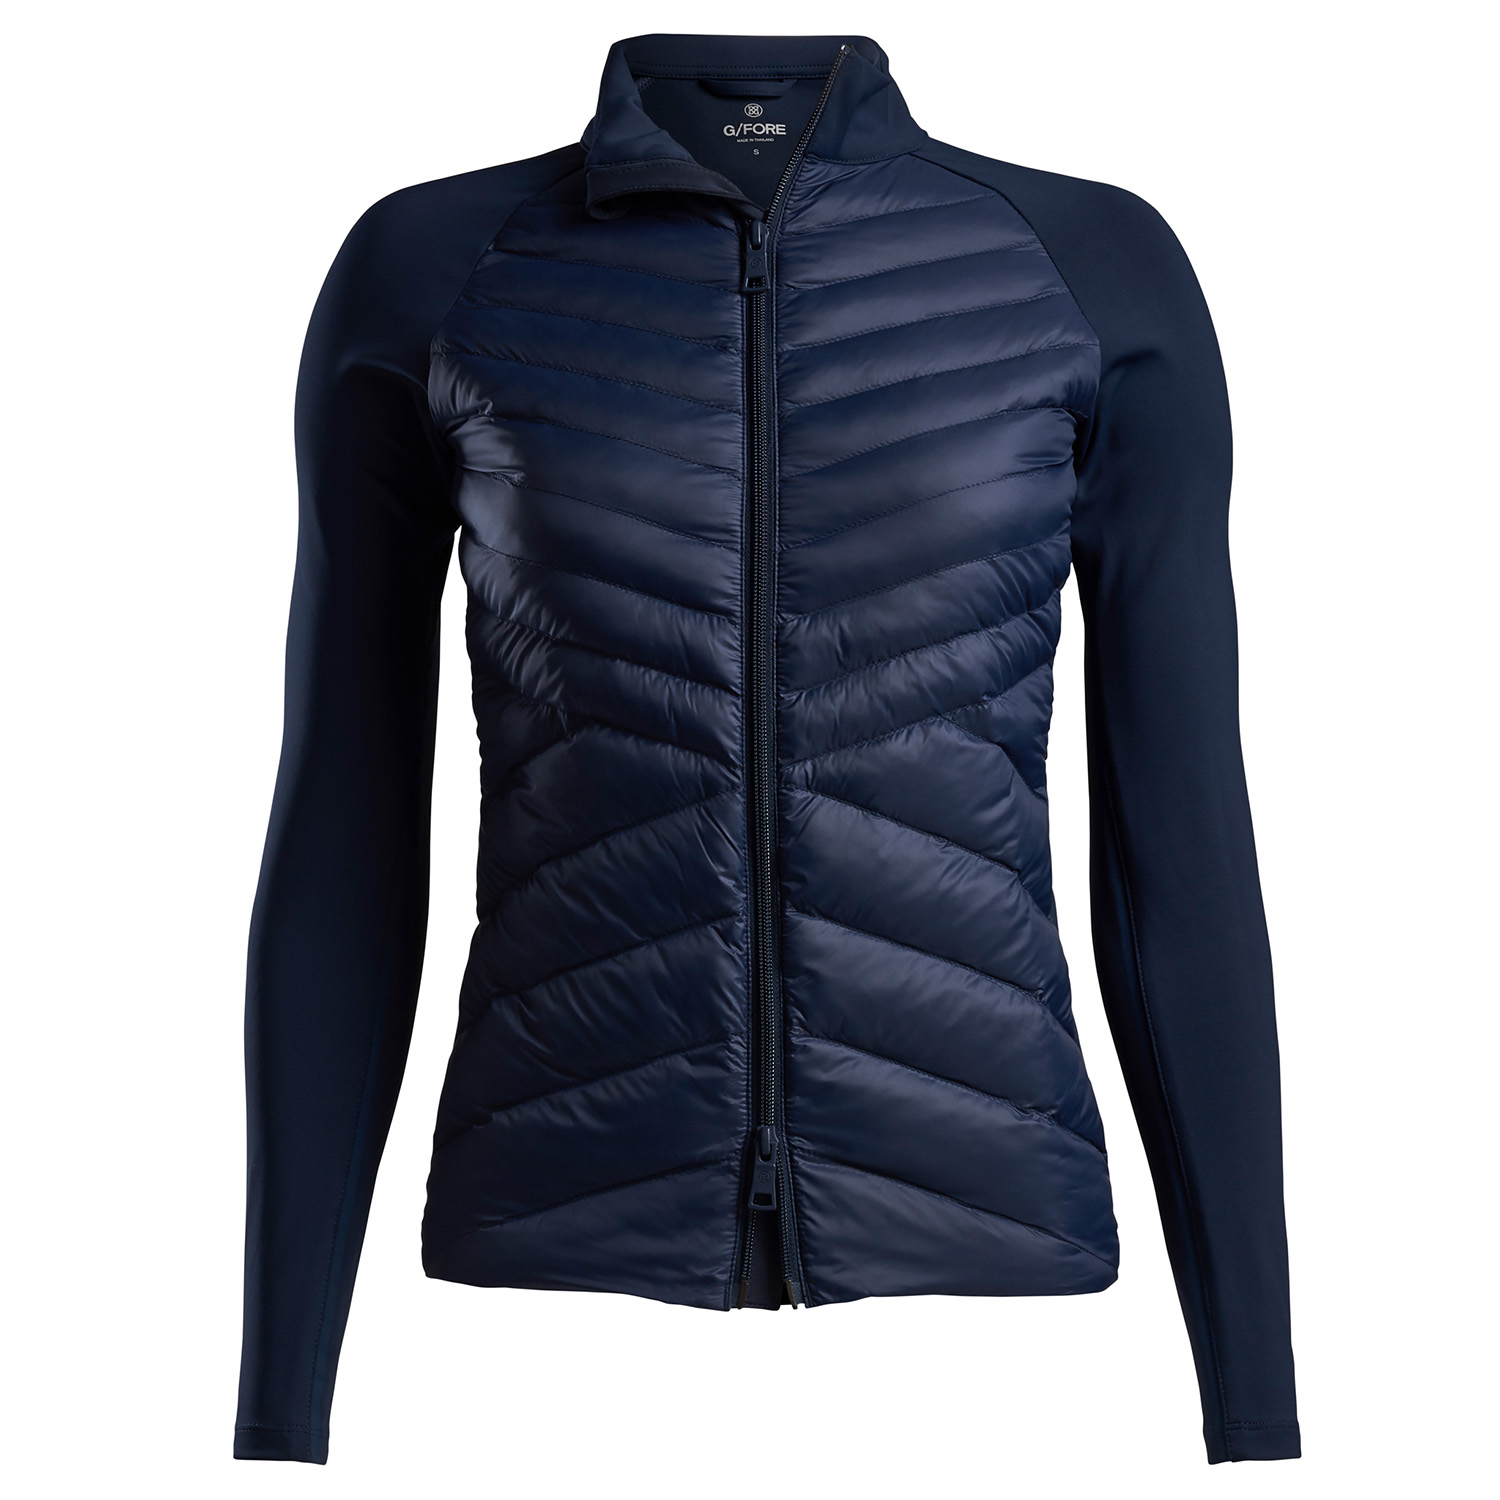 G/FORE Quilted Hybrid Ladies Jacket